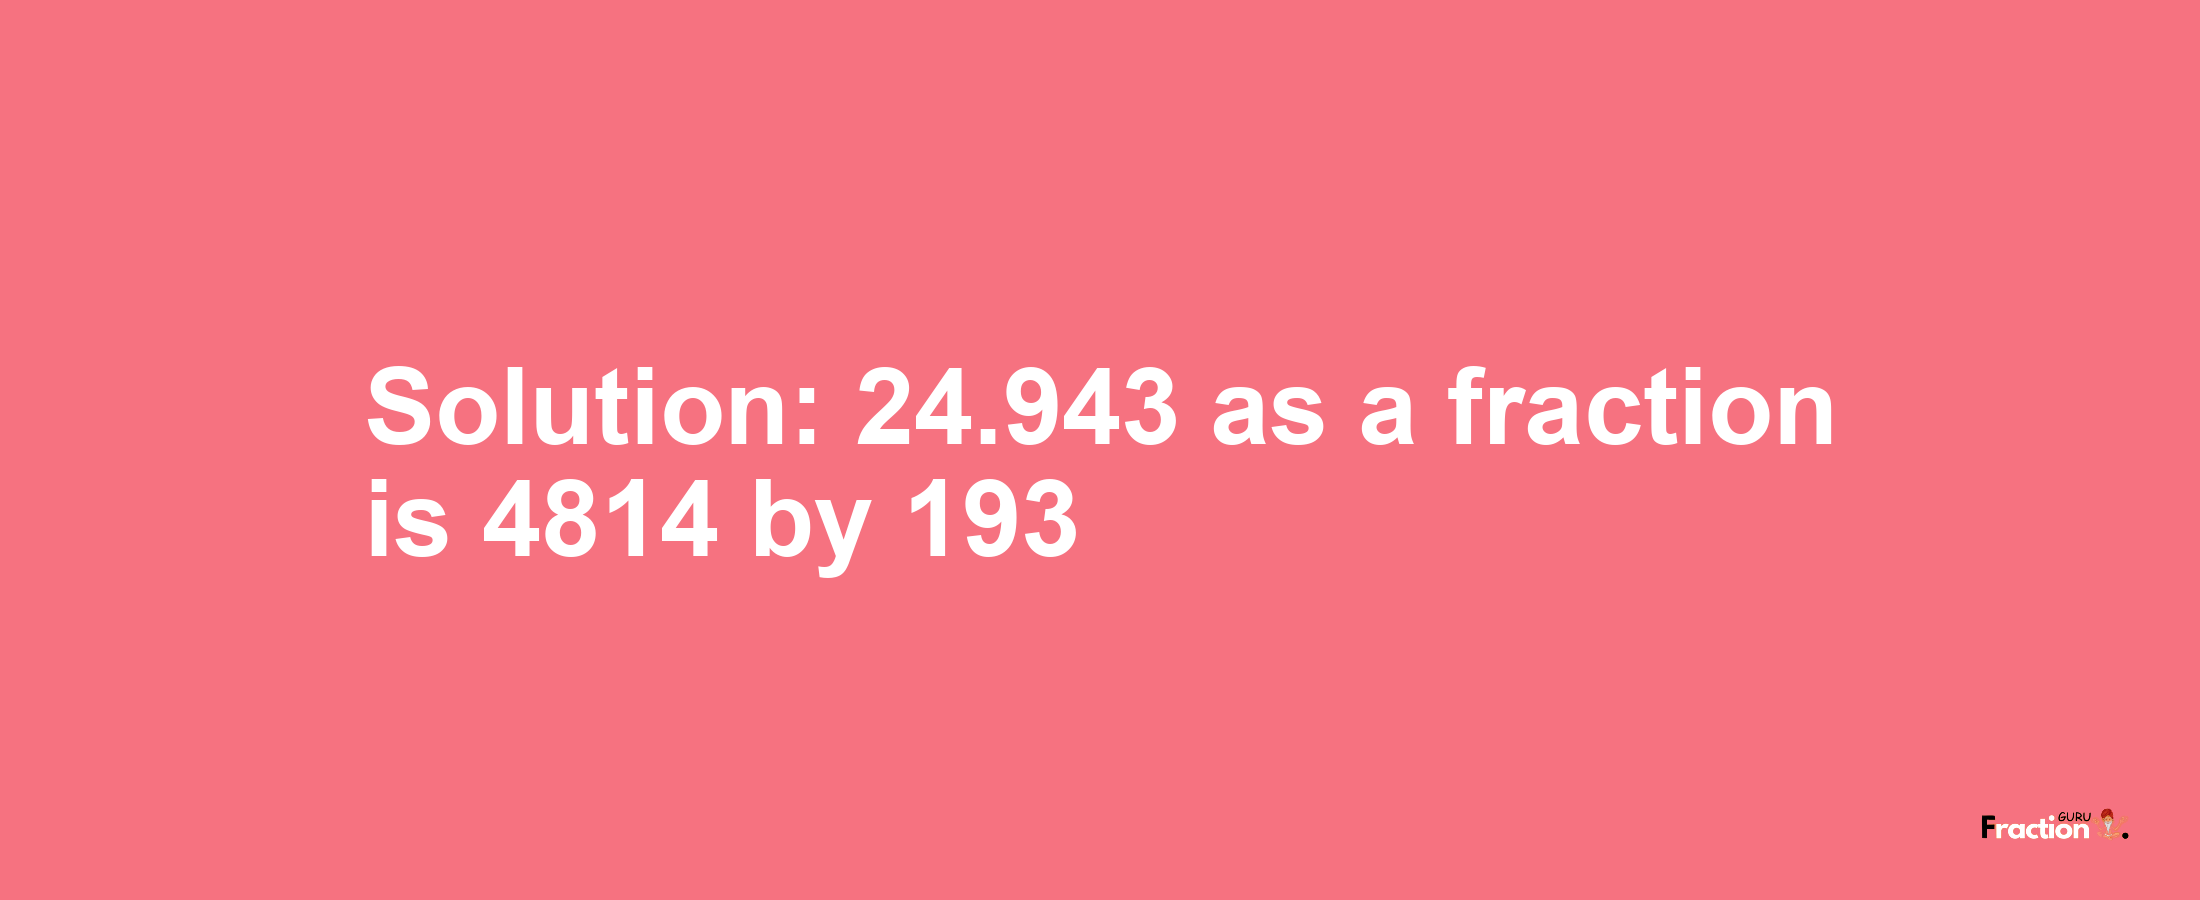 Solution:24.943 as a fraction is 4814/193